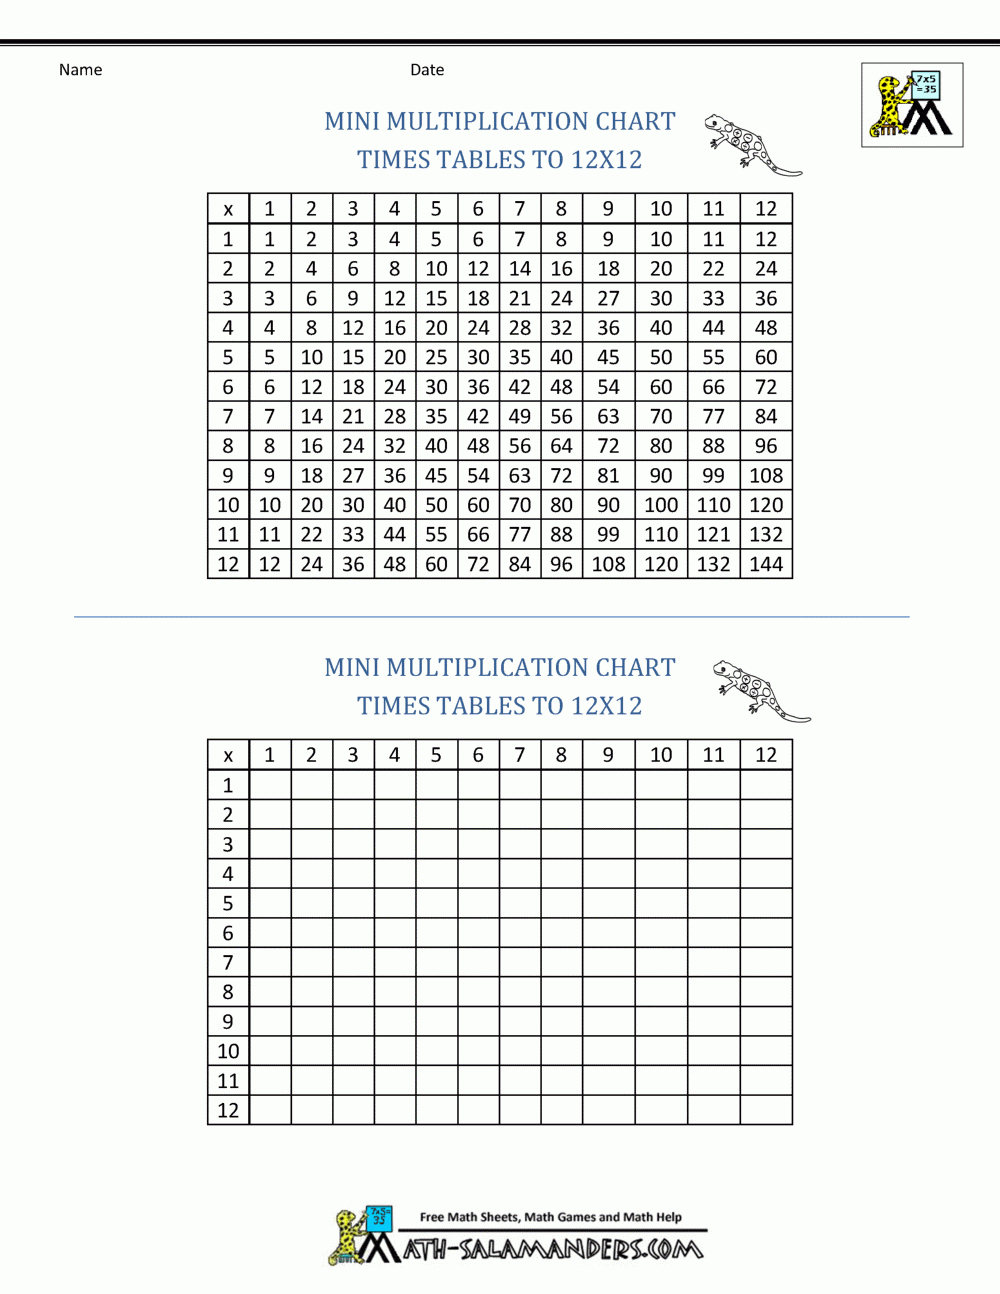 blank times table grid differentiated multiplication worksheets